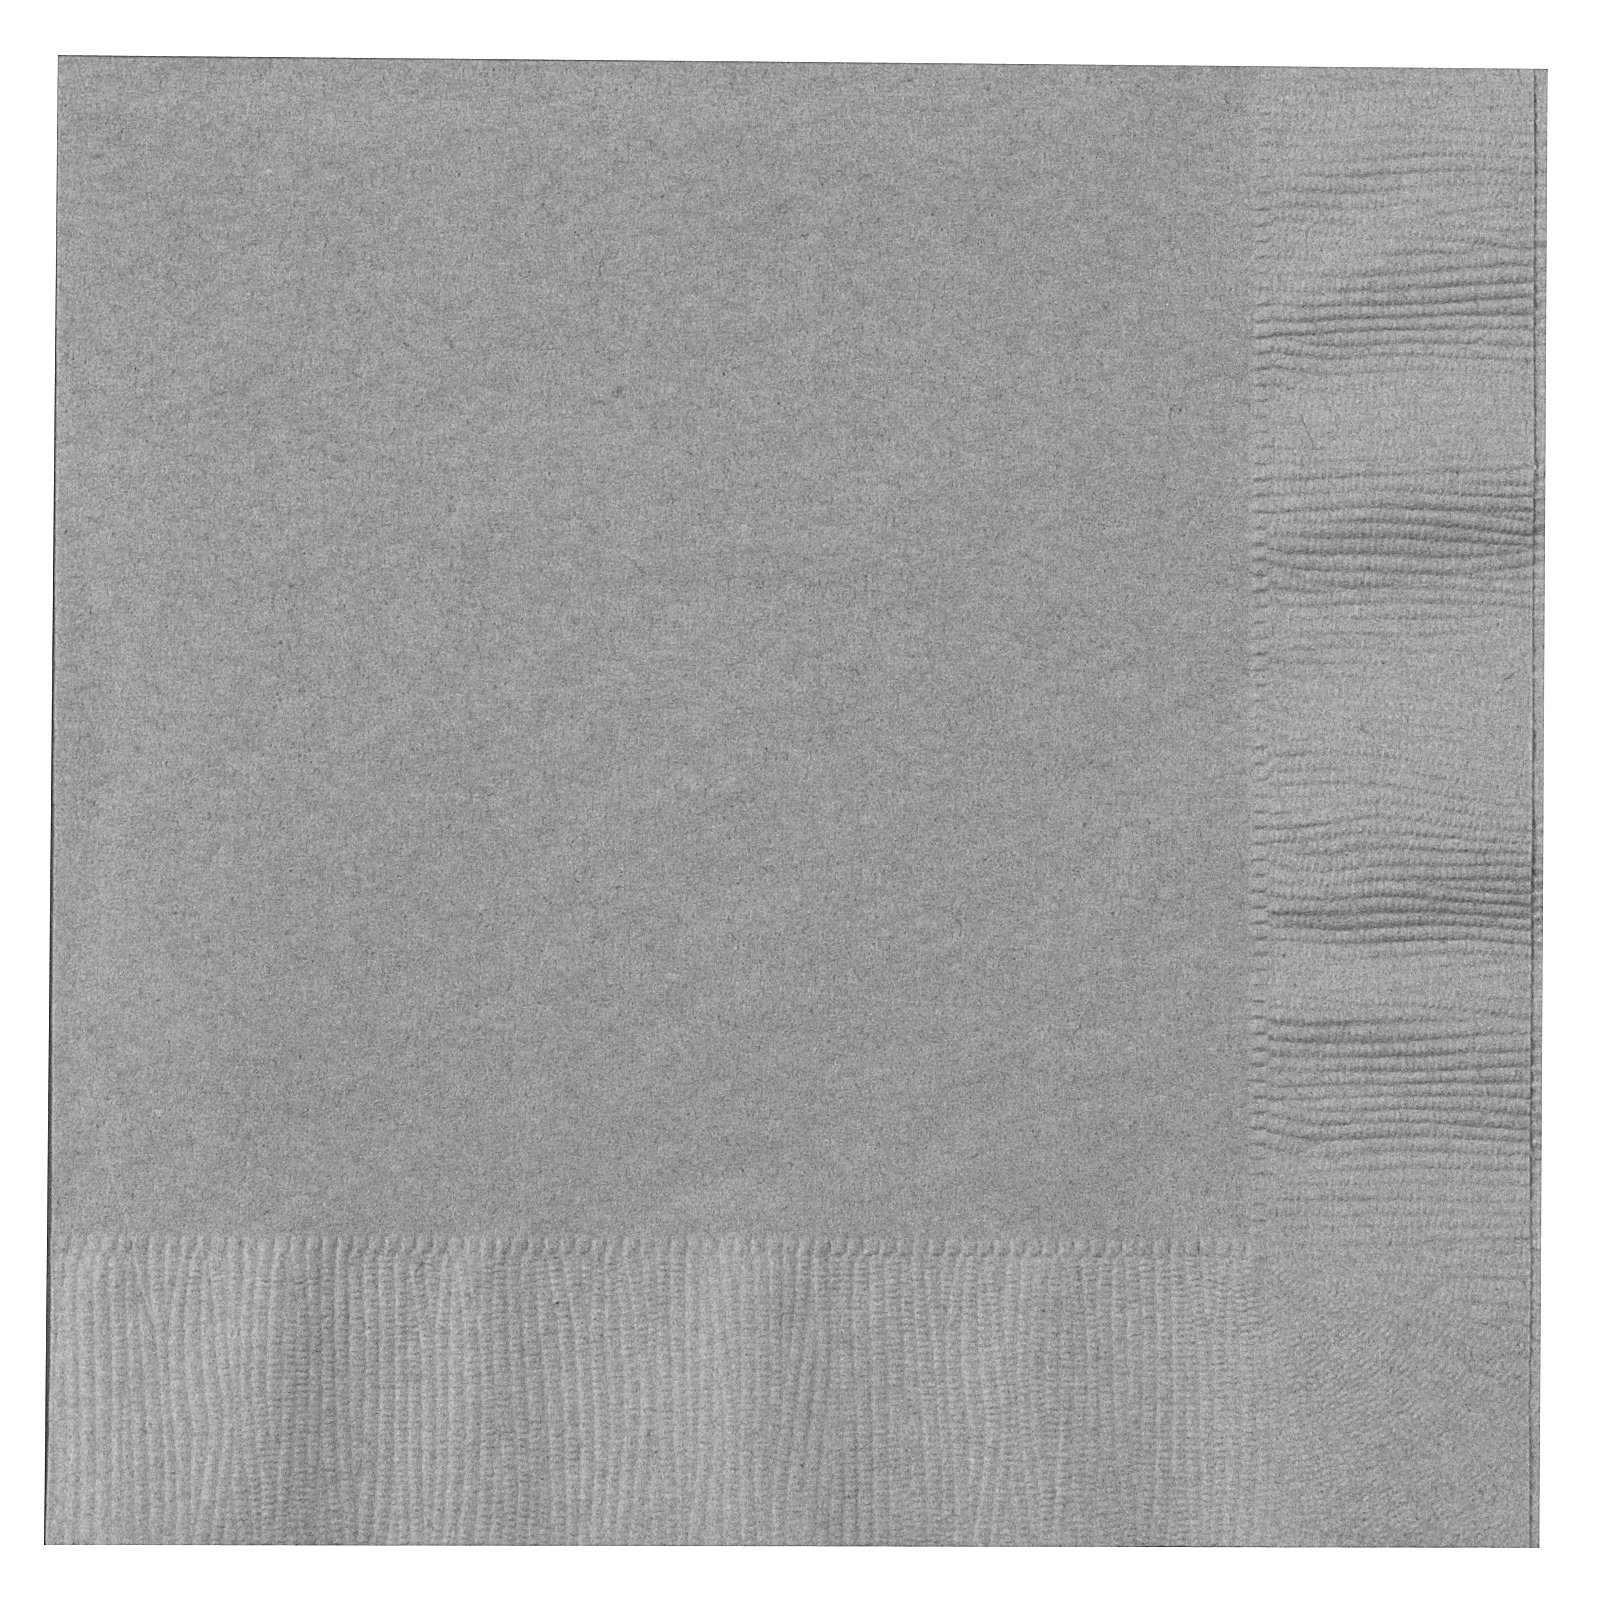 Shimmering Silver (Silver) Lunch Napkins (50 count)